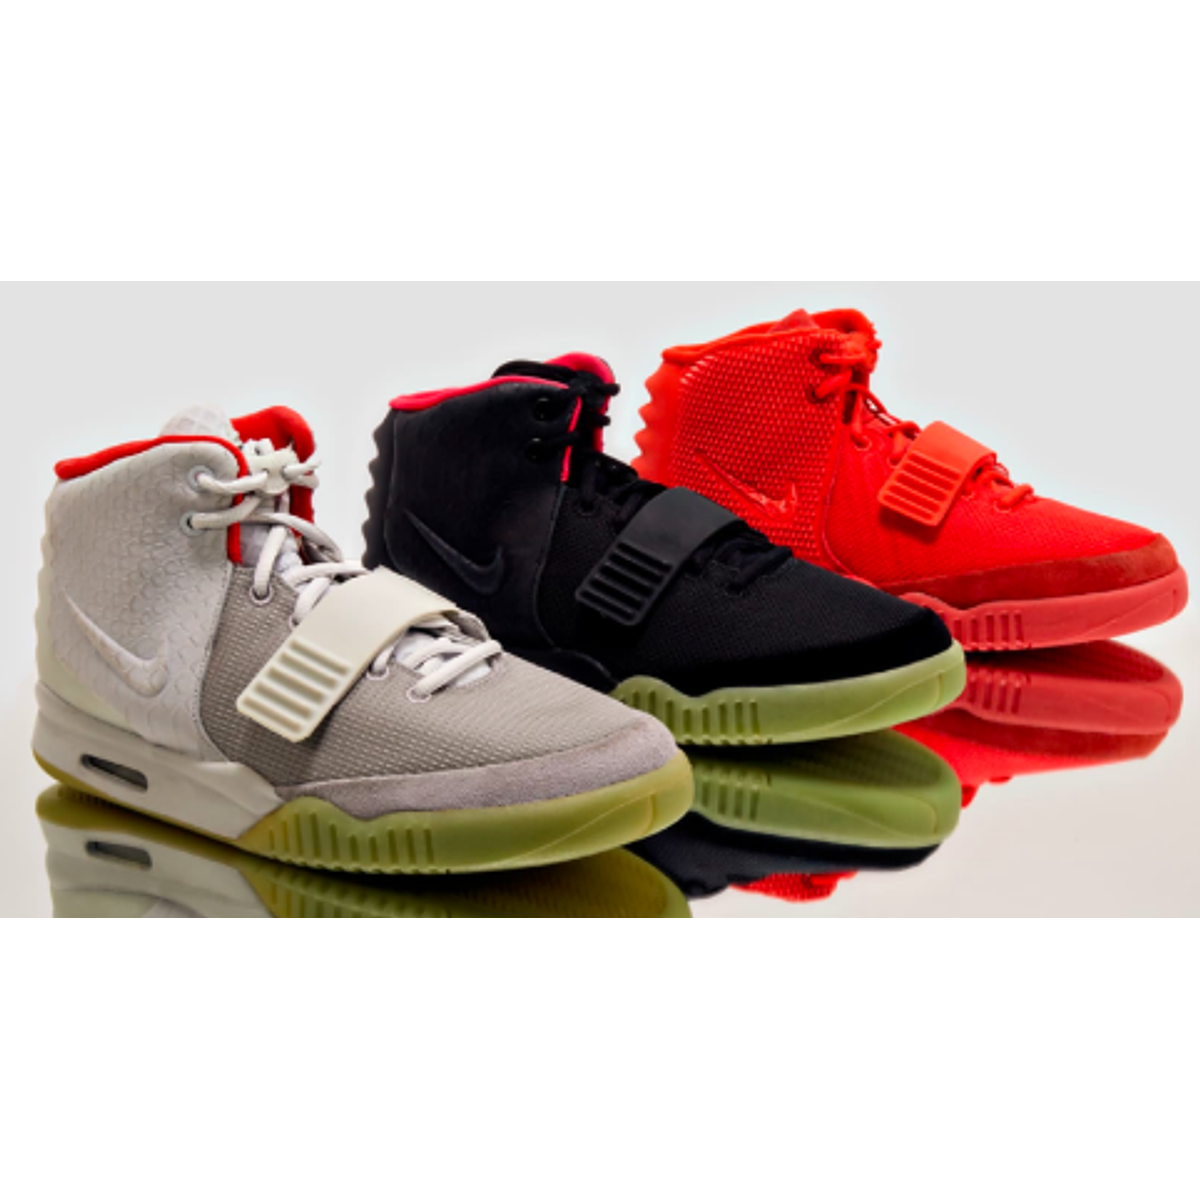 Nike Air YEEZY 2 (3 Colores)